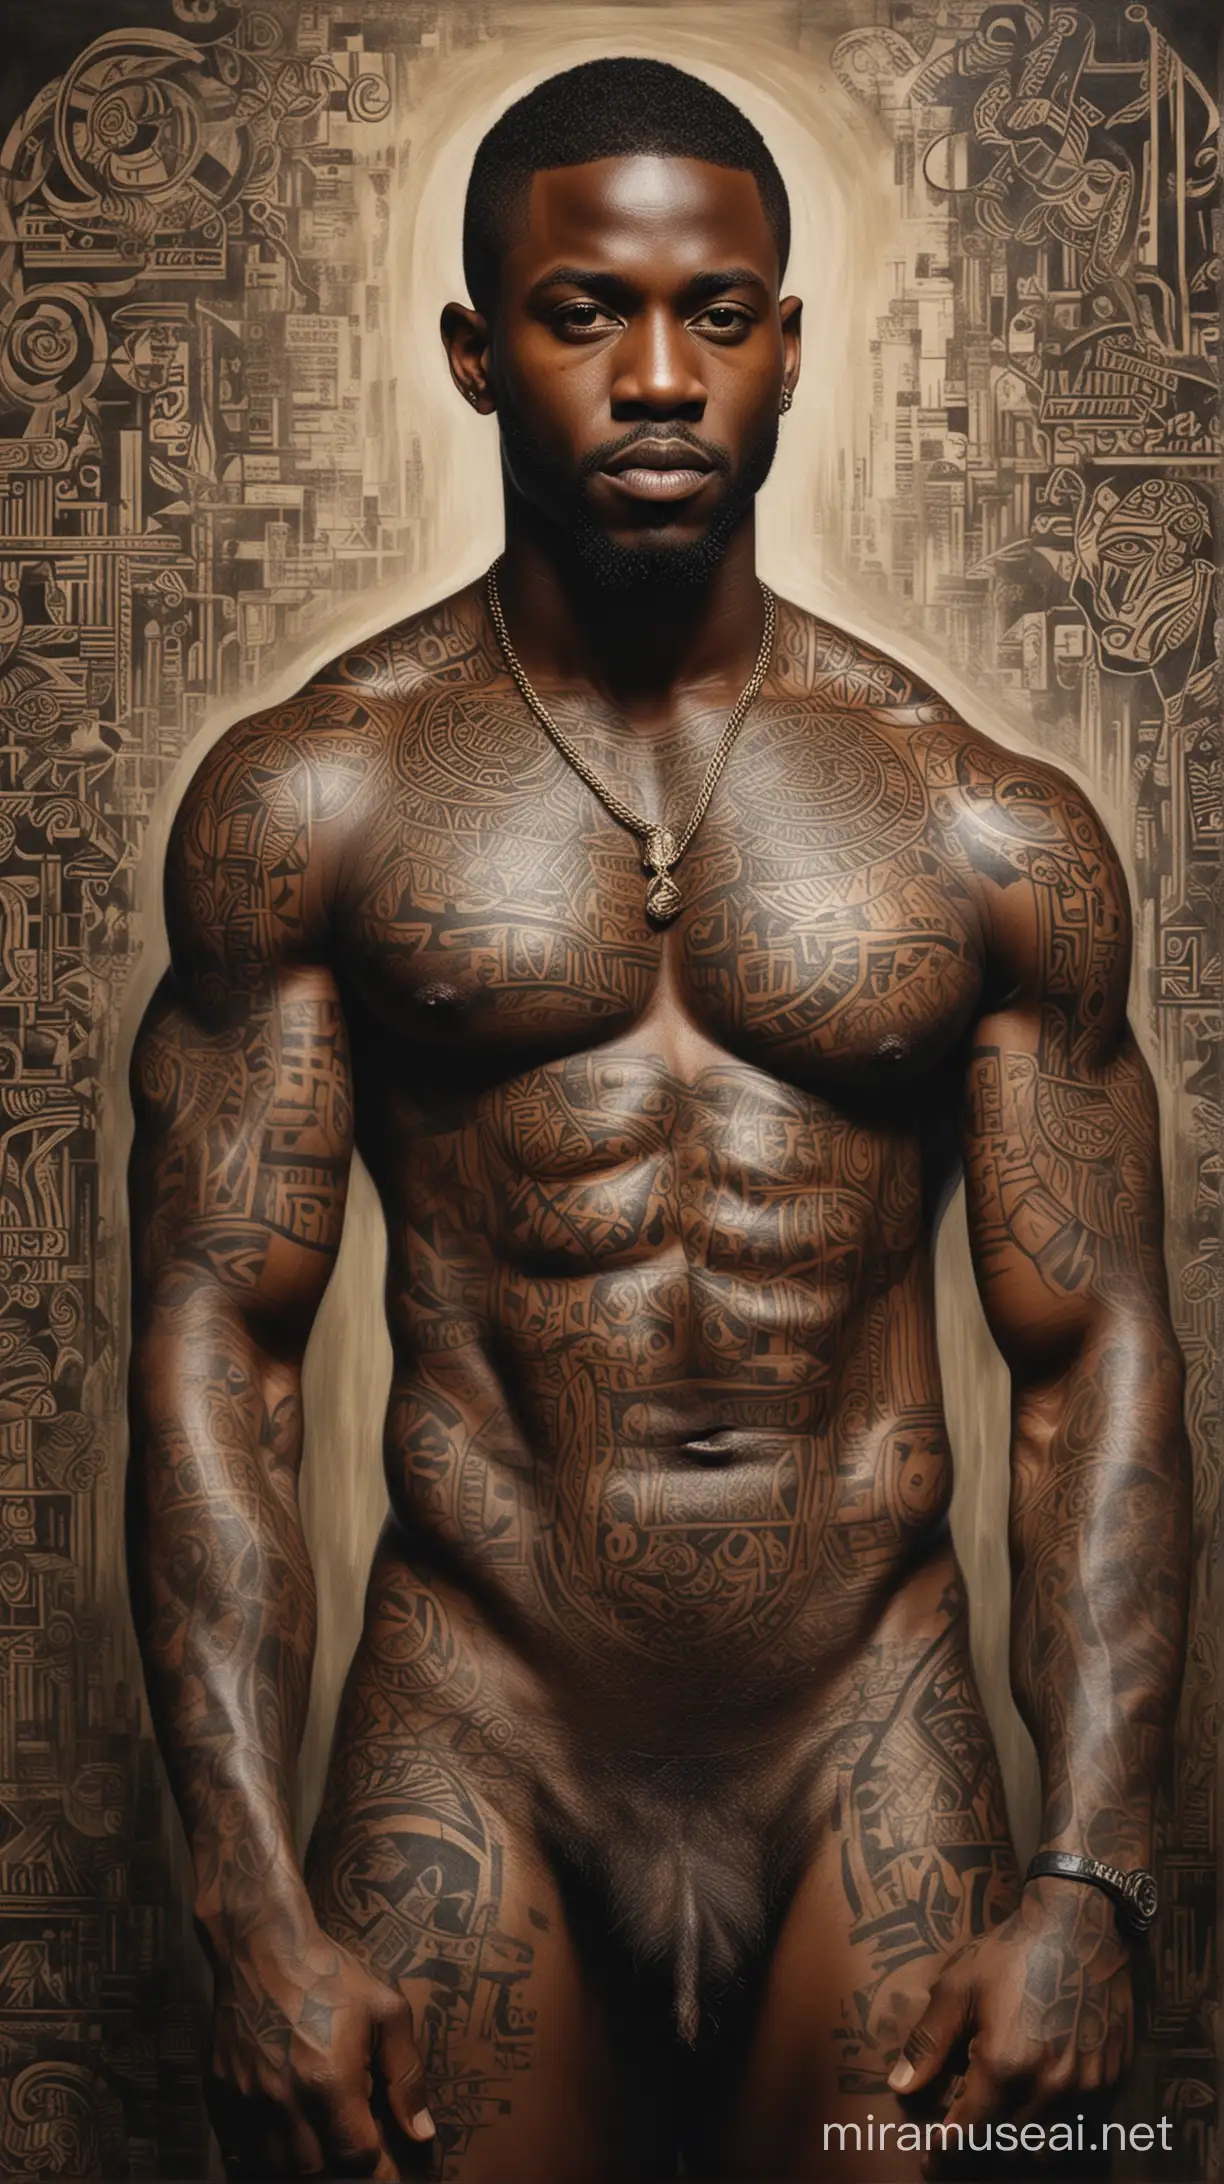 Provocative Modern Painting Tattooed Black Man as Protagonist